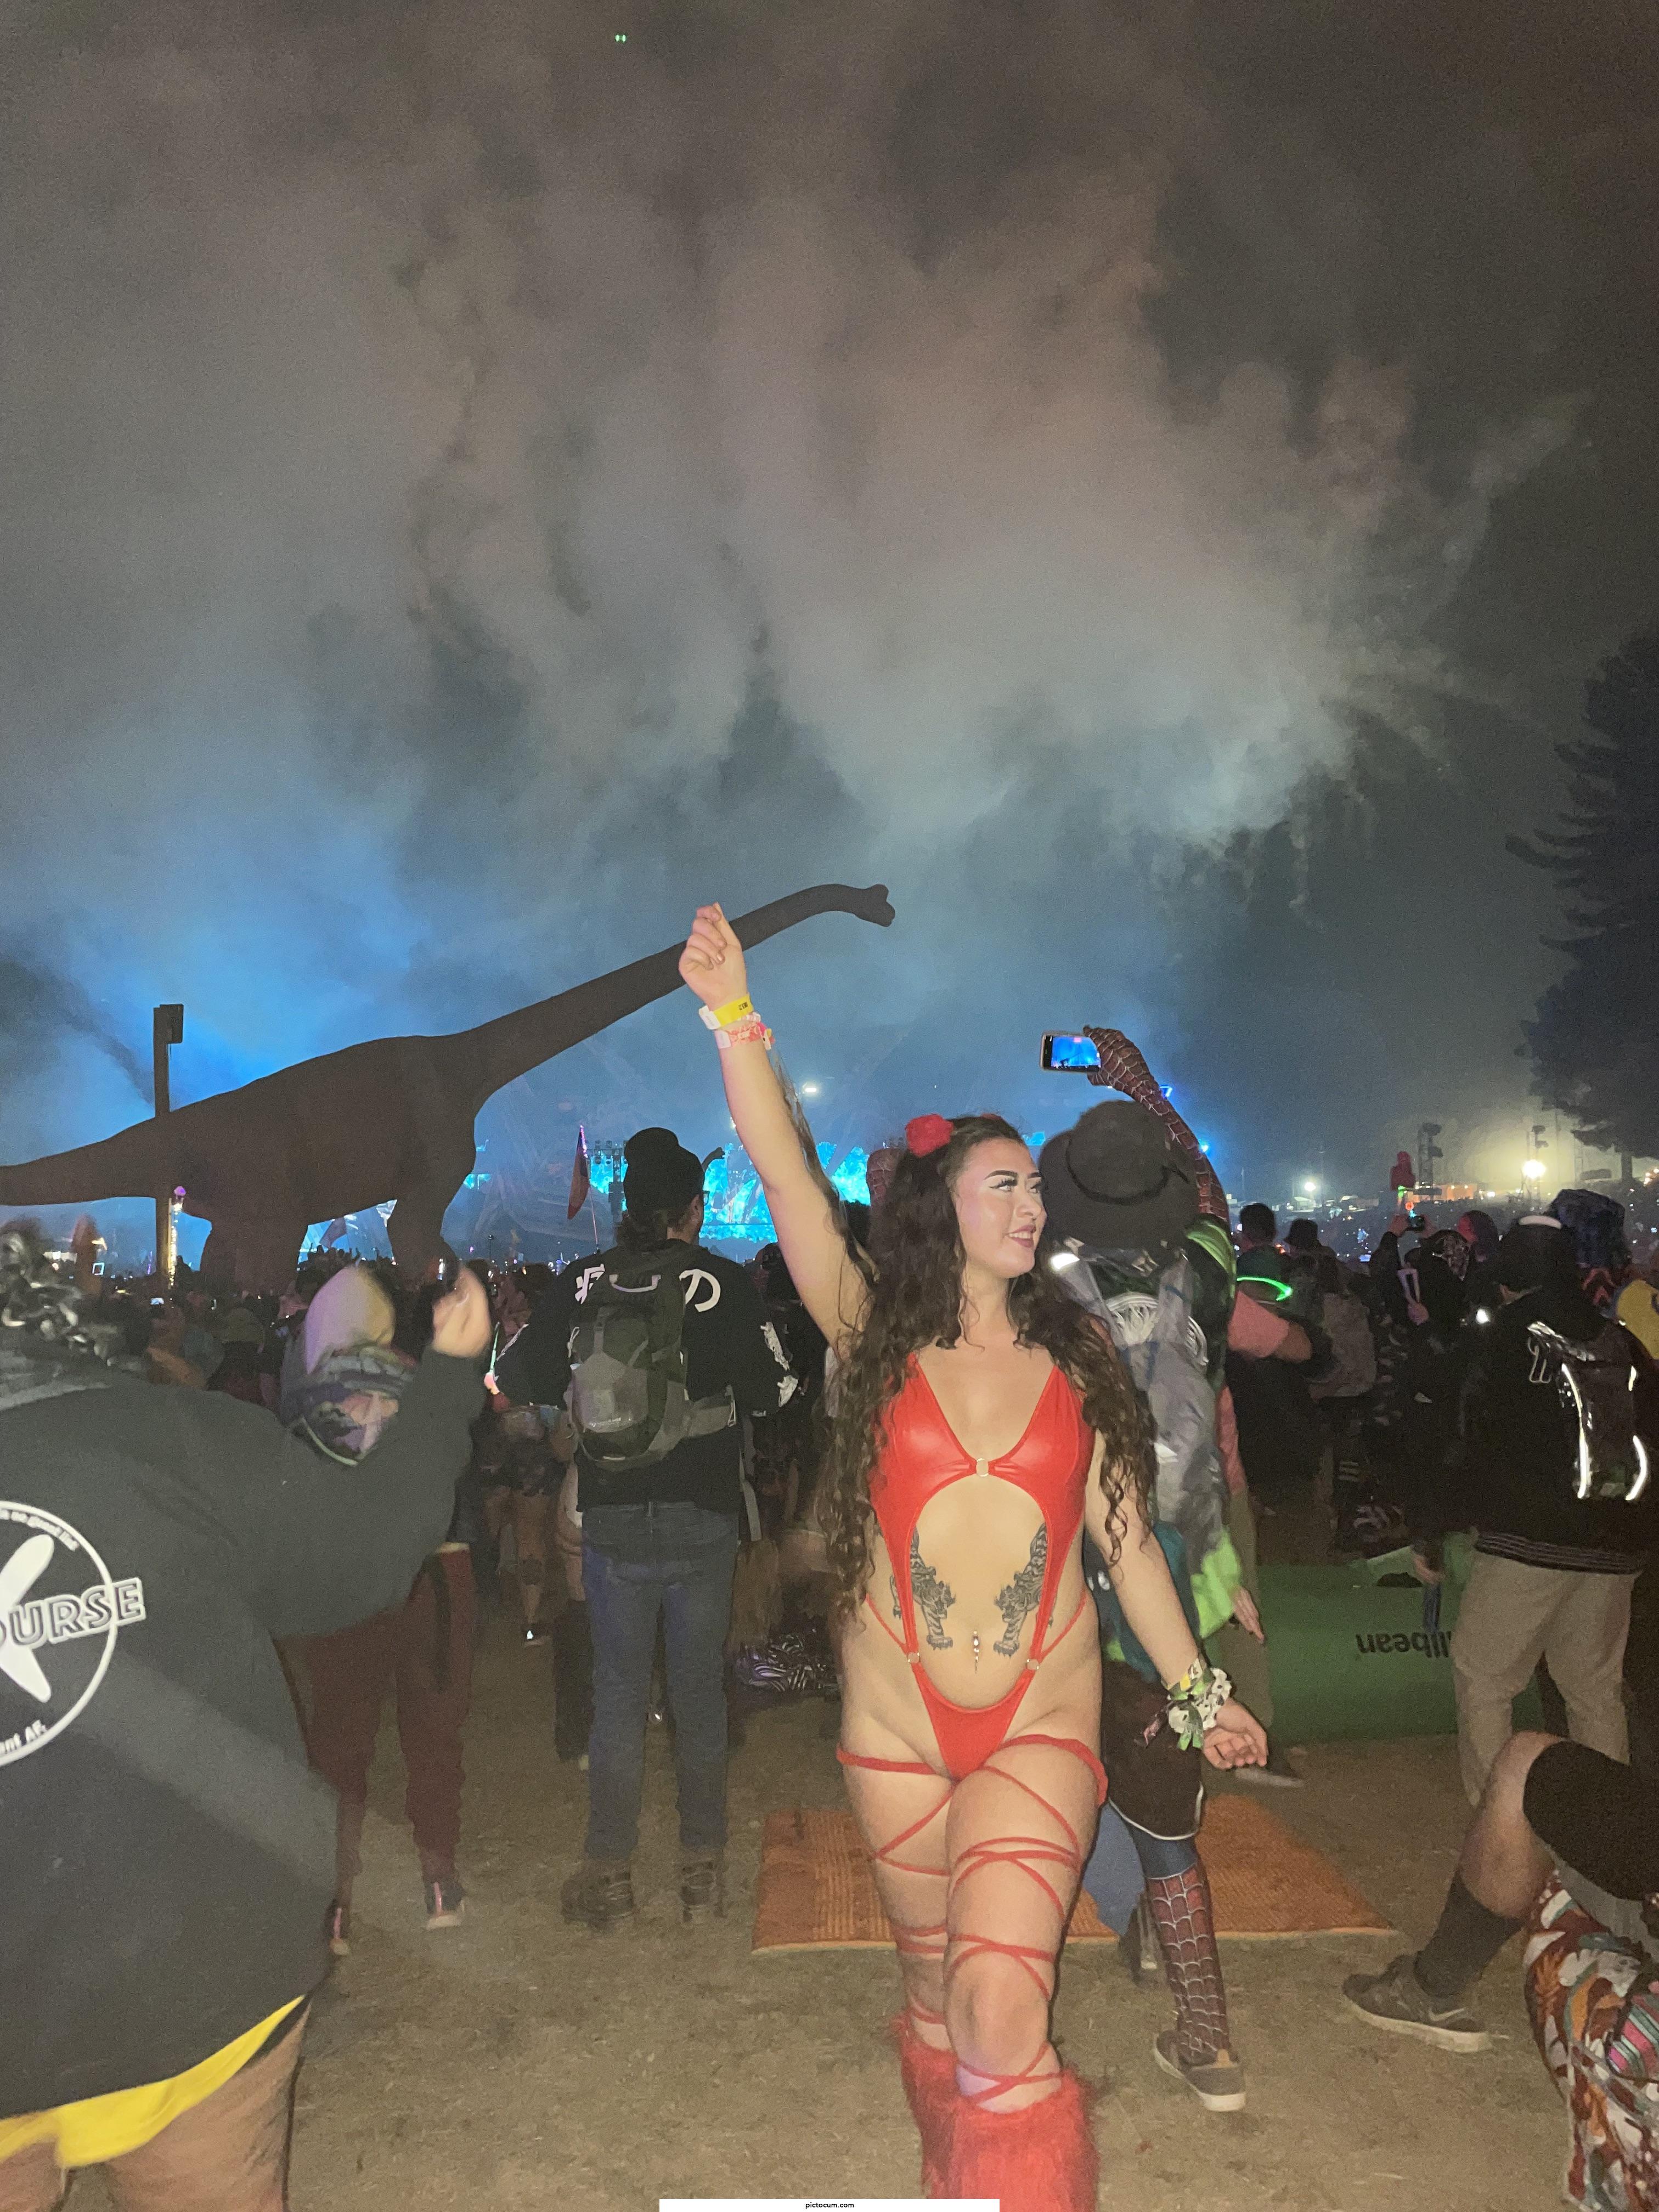 Didn’t quite get the lasers in the back but I got all the firework smoke😂 how do you like my day 3 fit though